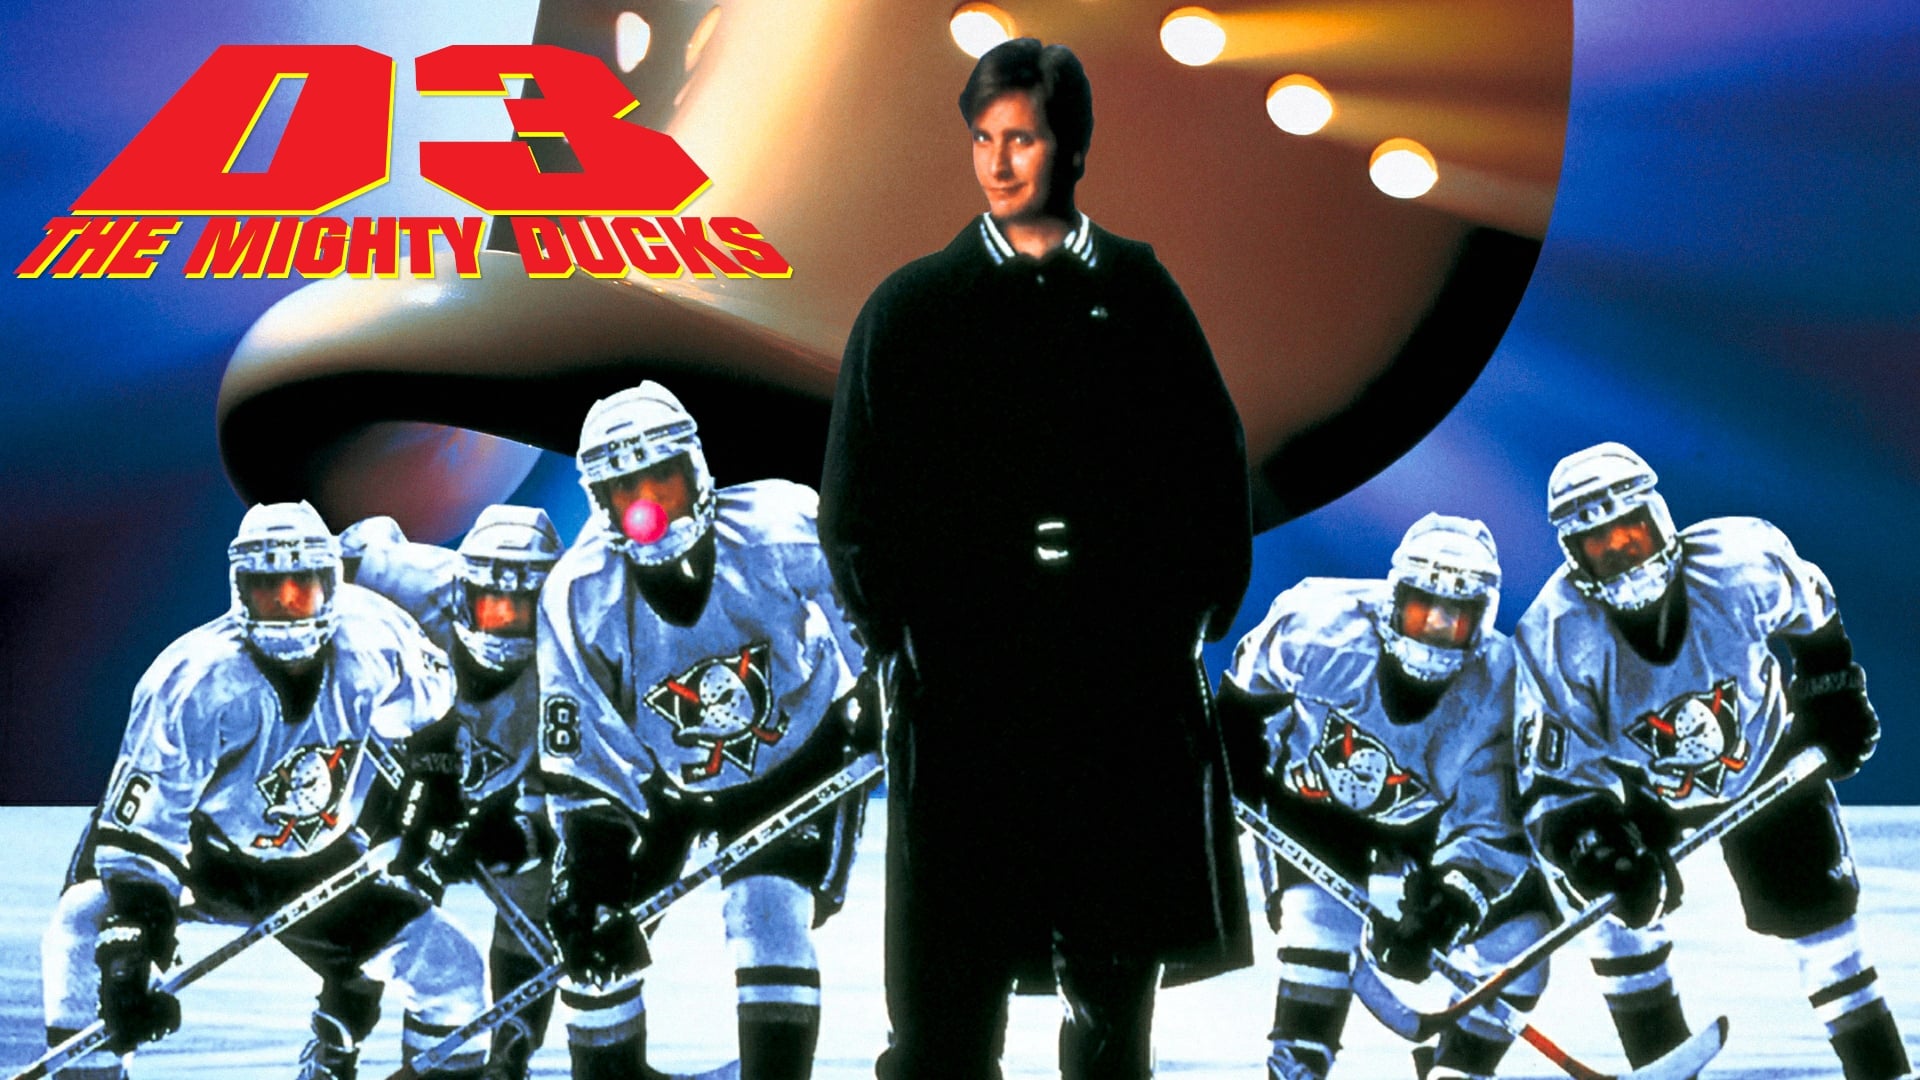 The Mighty Ducks 3: Champions 3